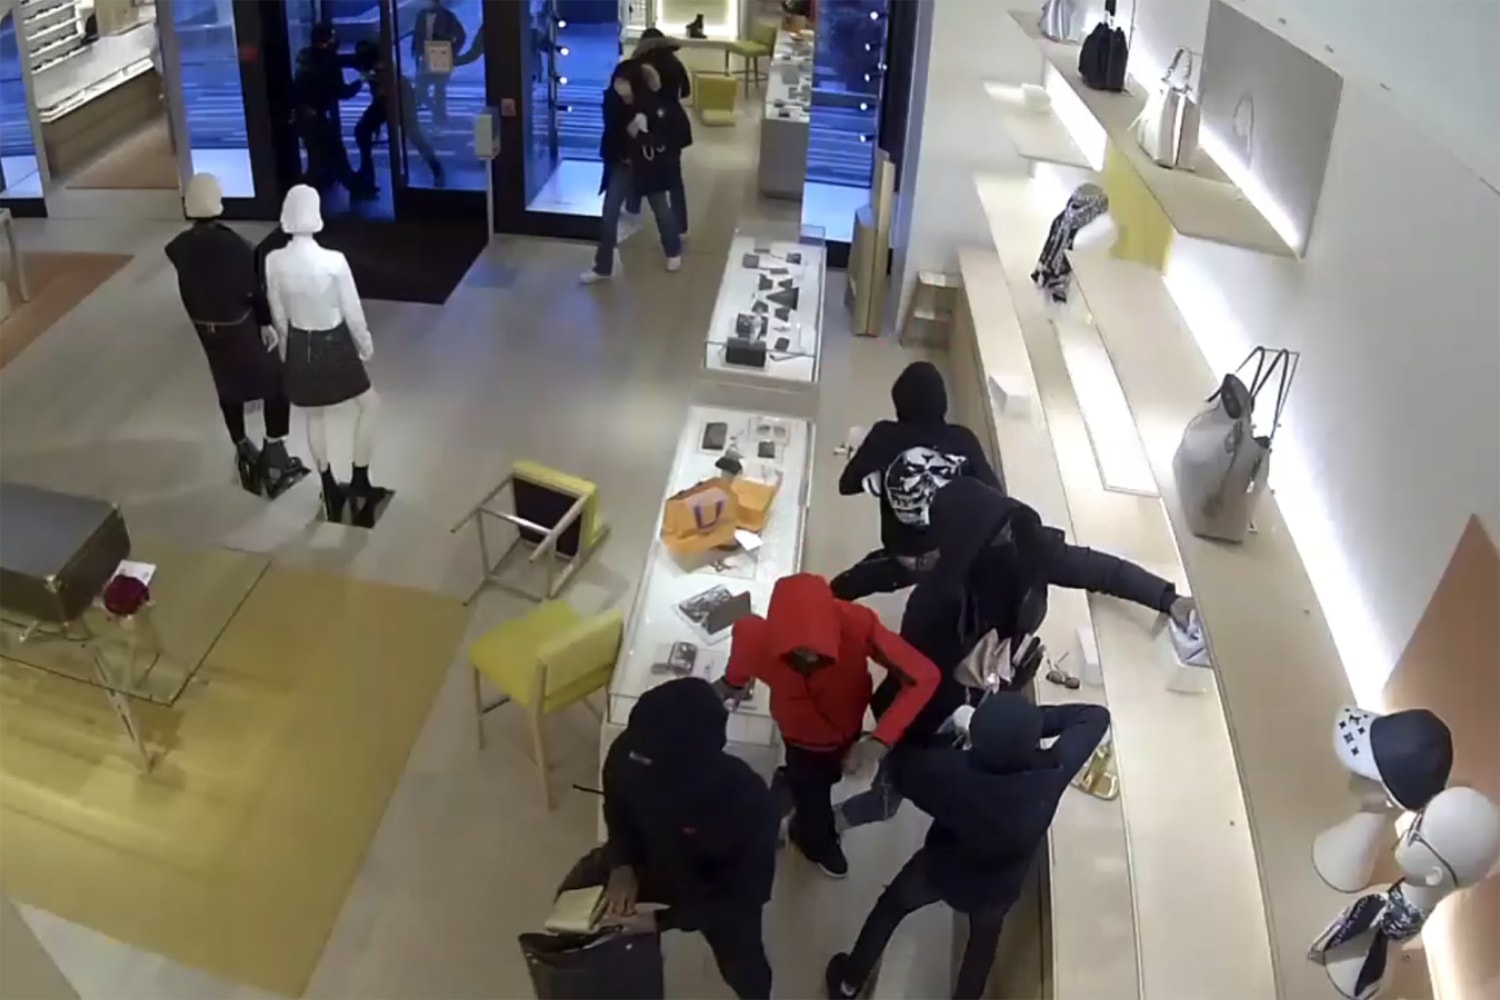 80 Suspects Rob Nordstrom in Smash-And-Grab Frenzy Lasting 1 Minute